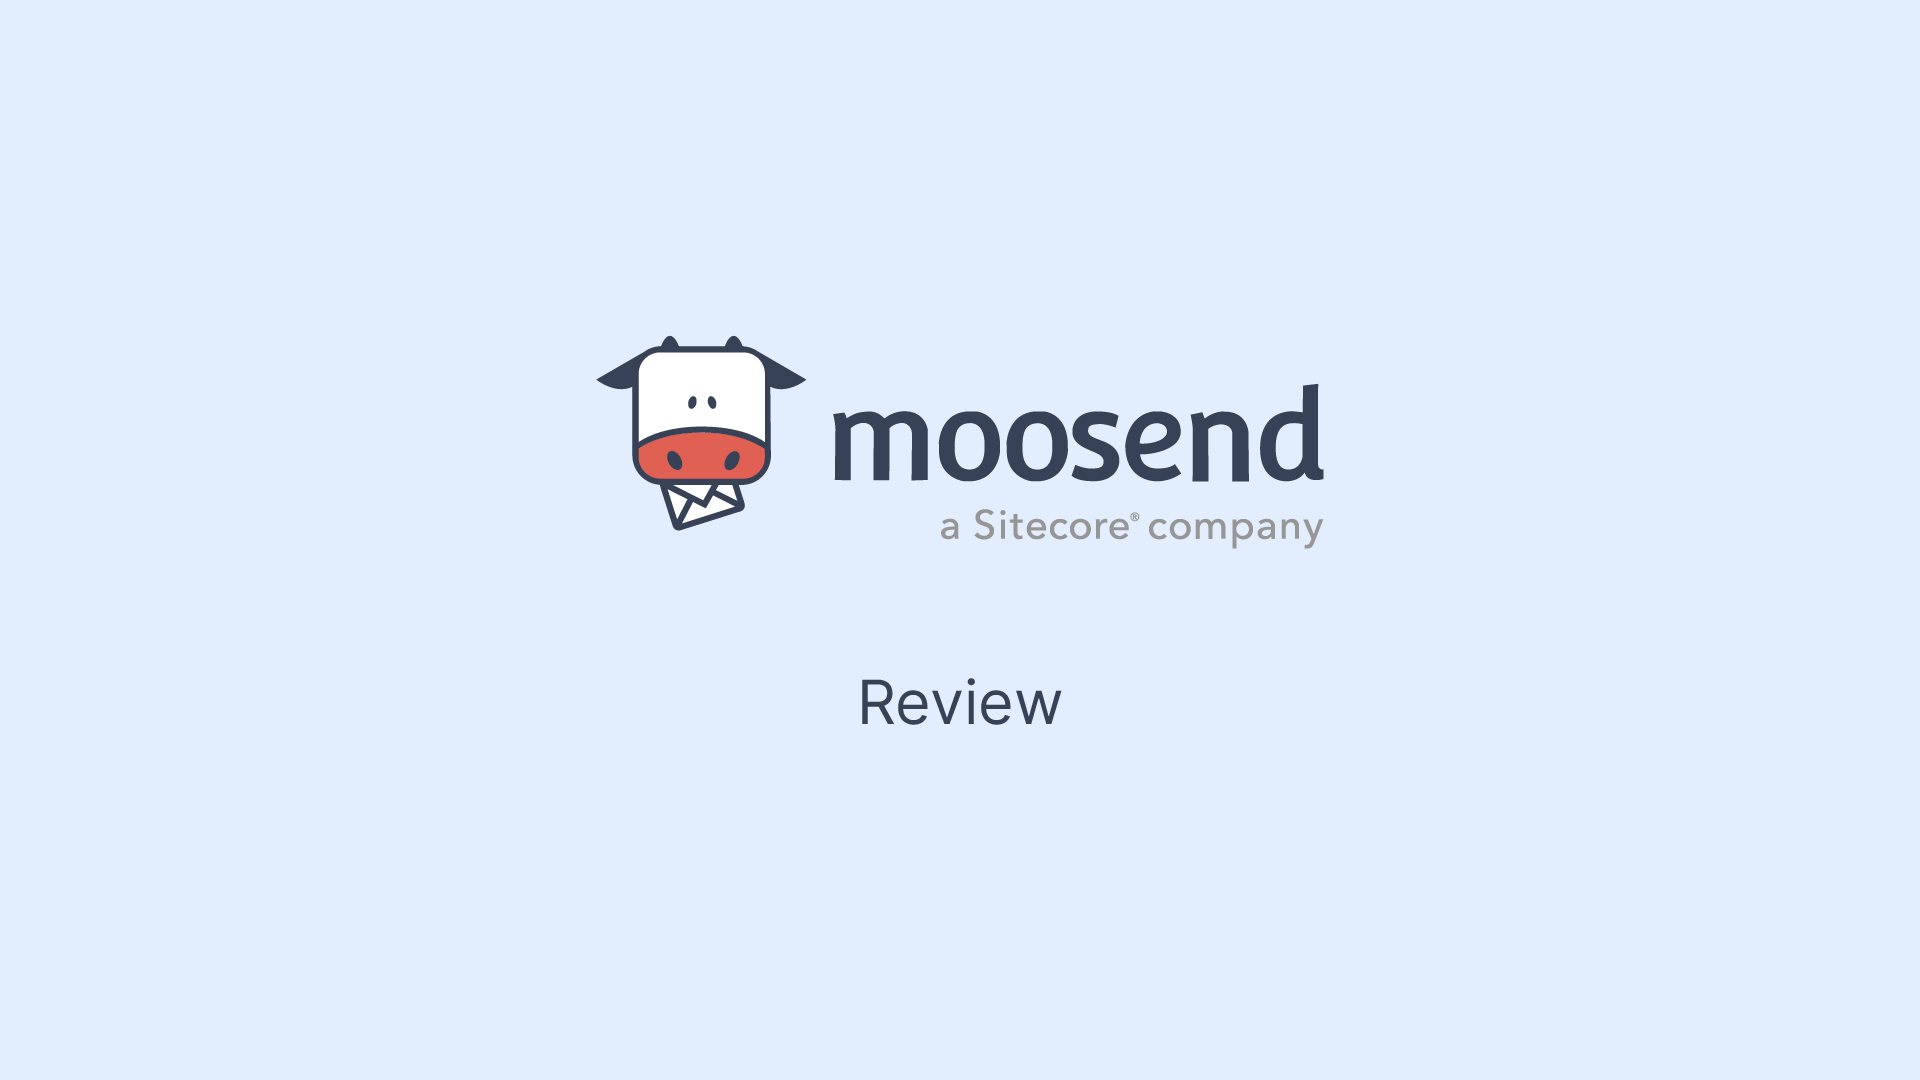 Moosend review_featured image